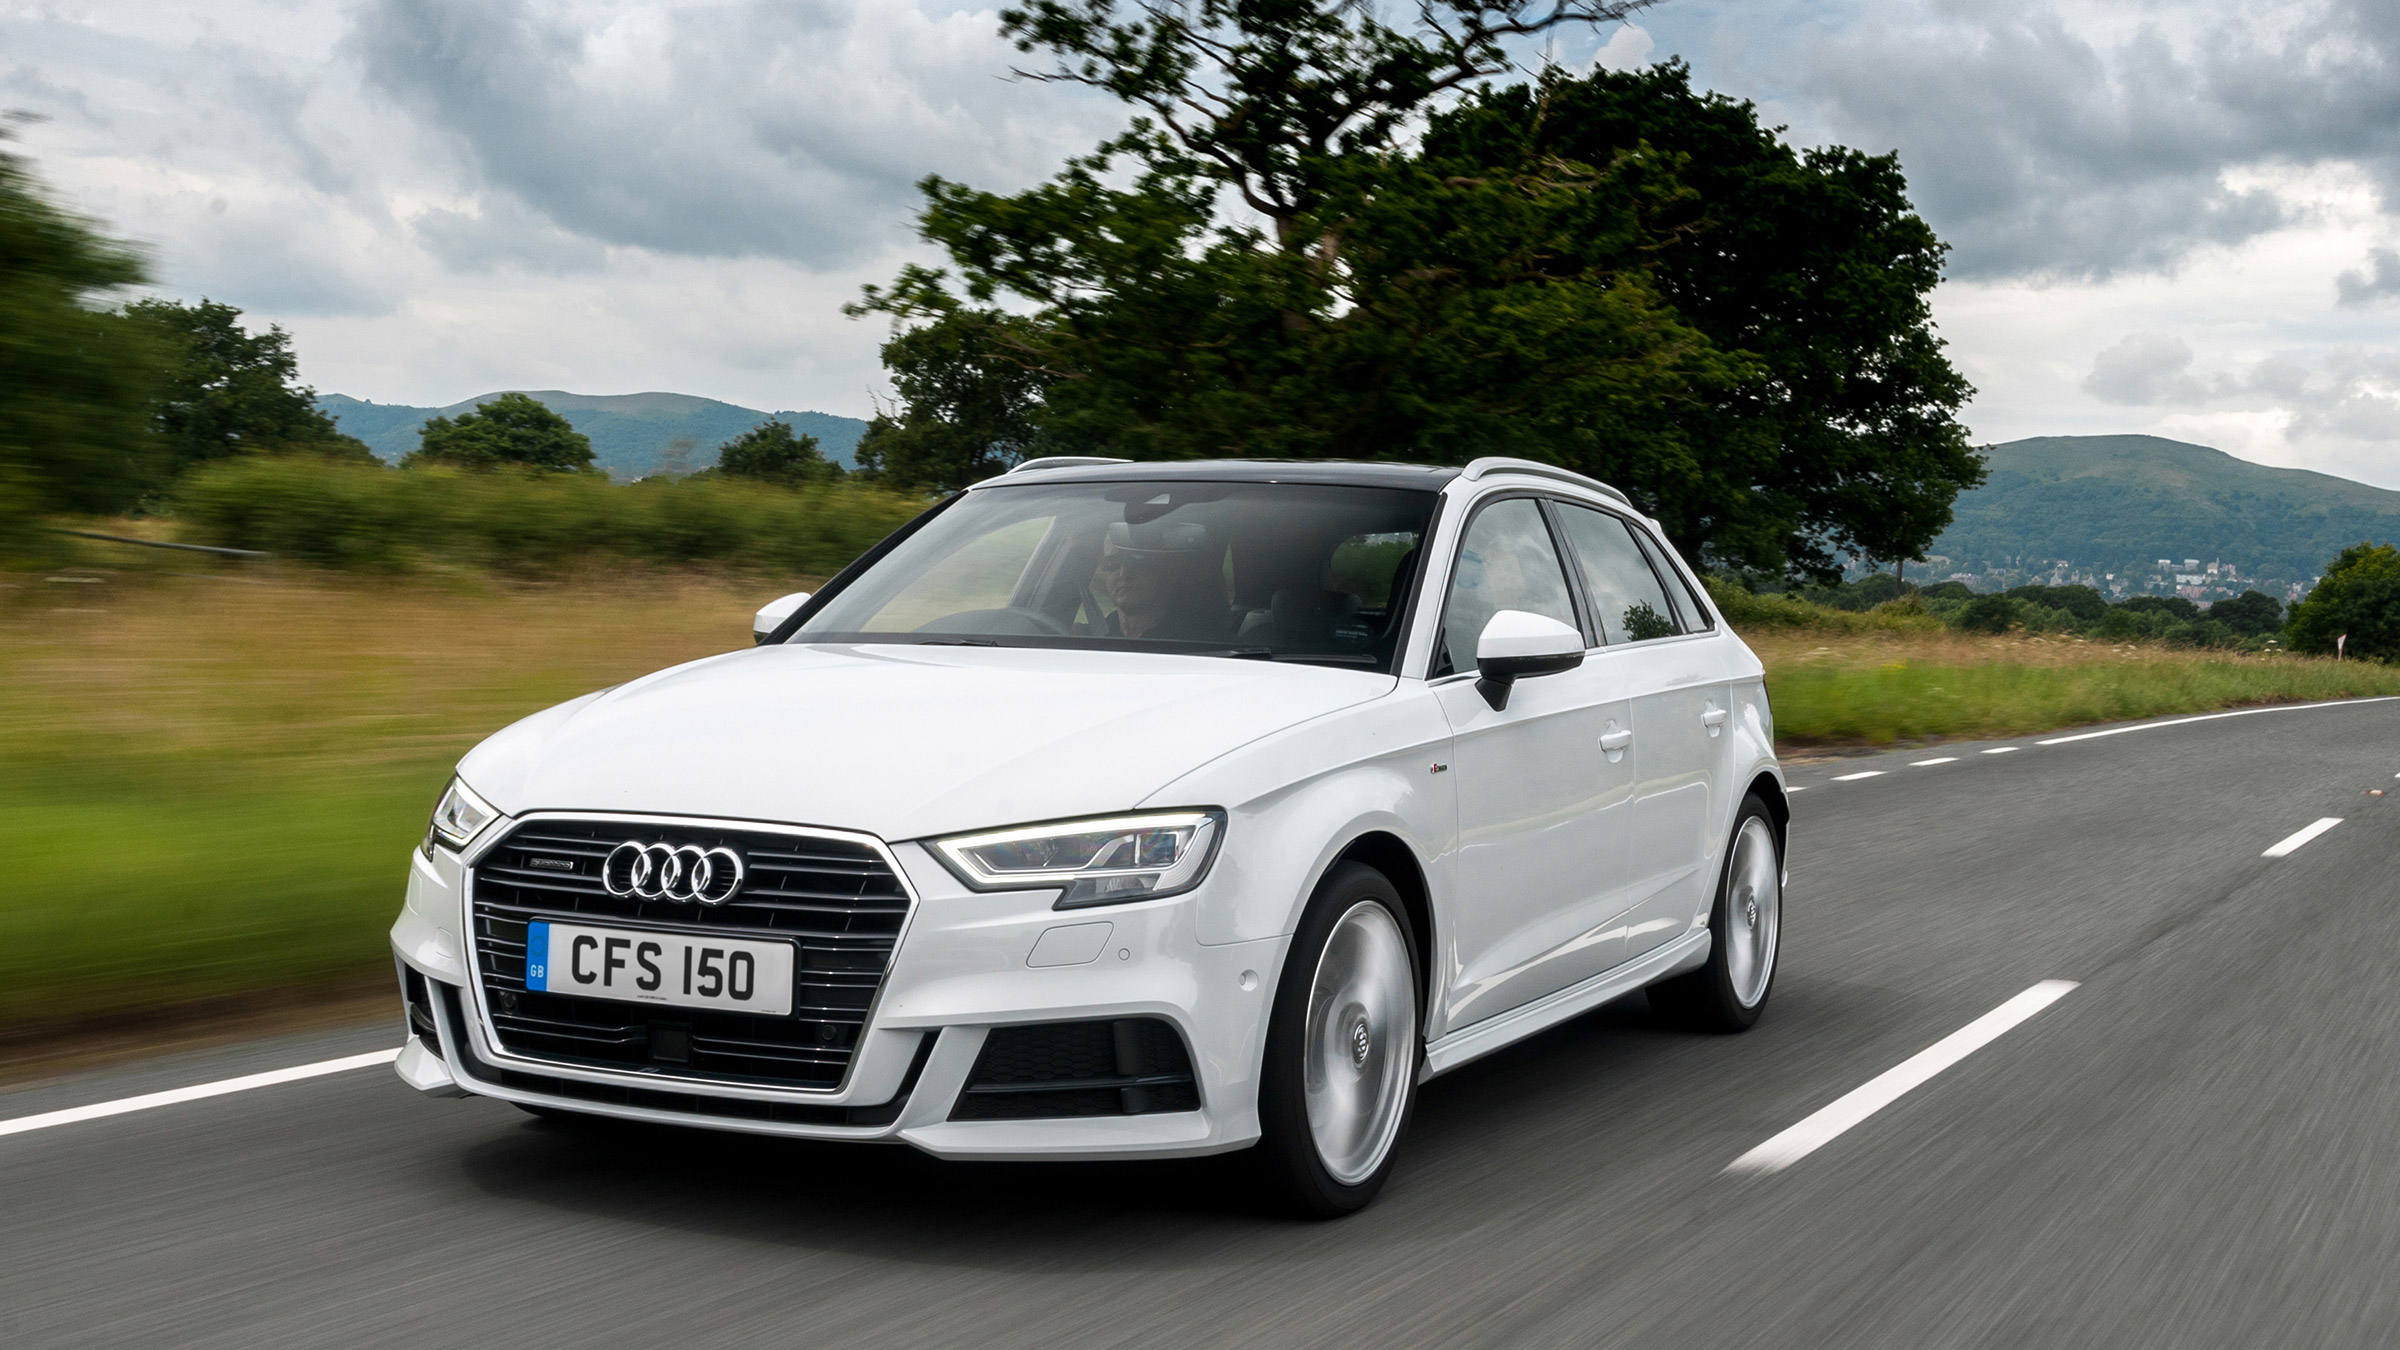 Audi A3 Sportback review - prices, specs and 0-60 time